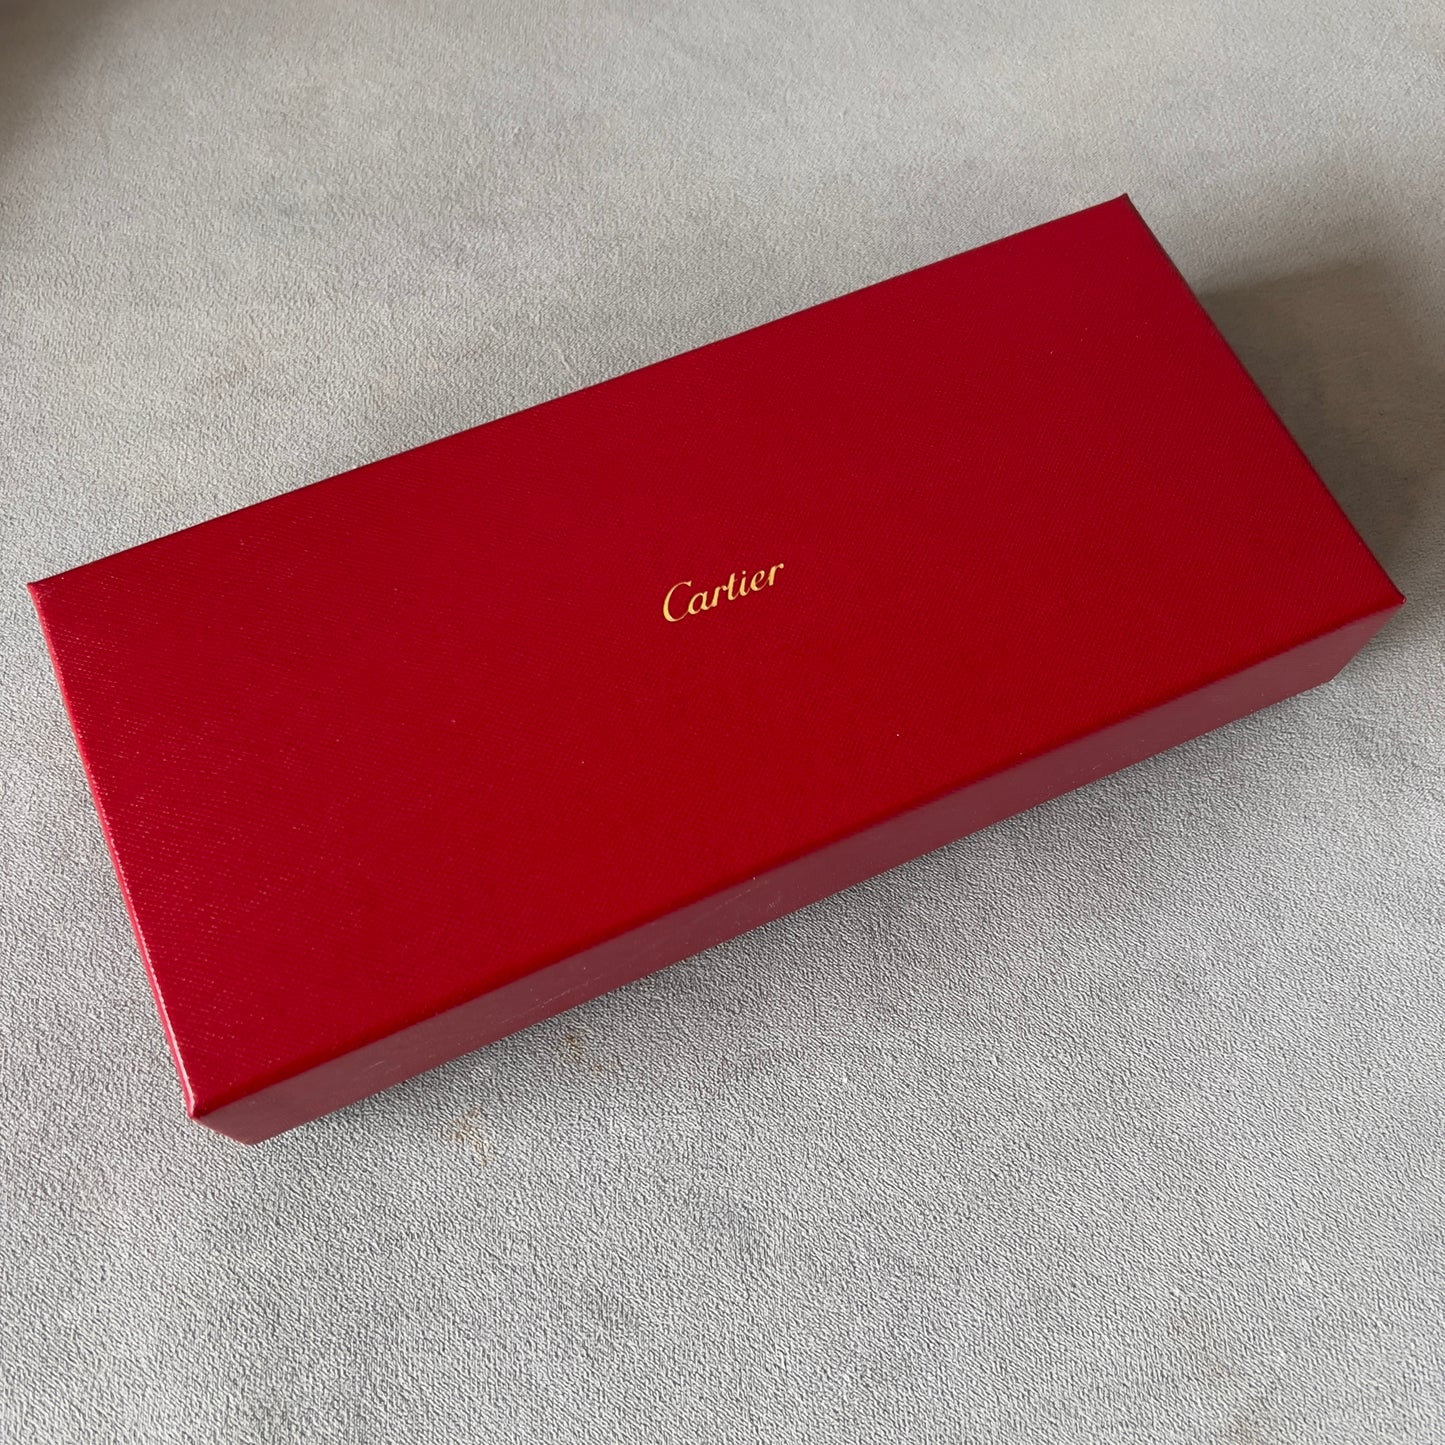 CARTIER Bracelet Box + Outer Box 9.35x4.20x1.90 inches